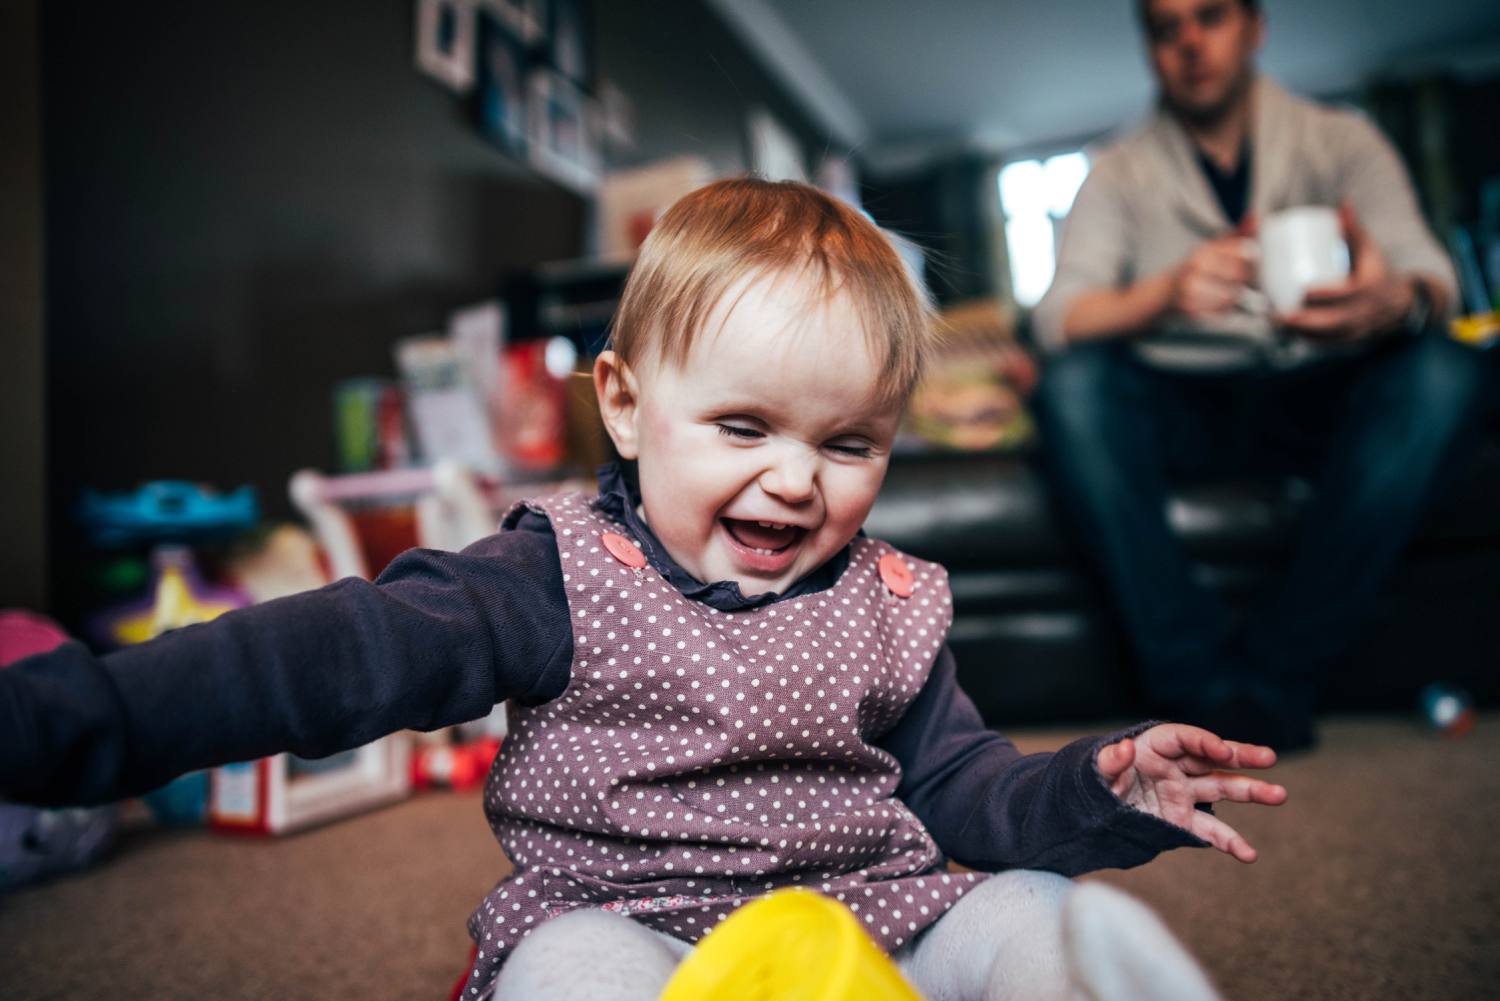 Baby girls 1st birthday at home lifestyle session. Essex UK Documentary Photographer.